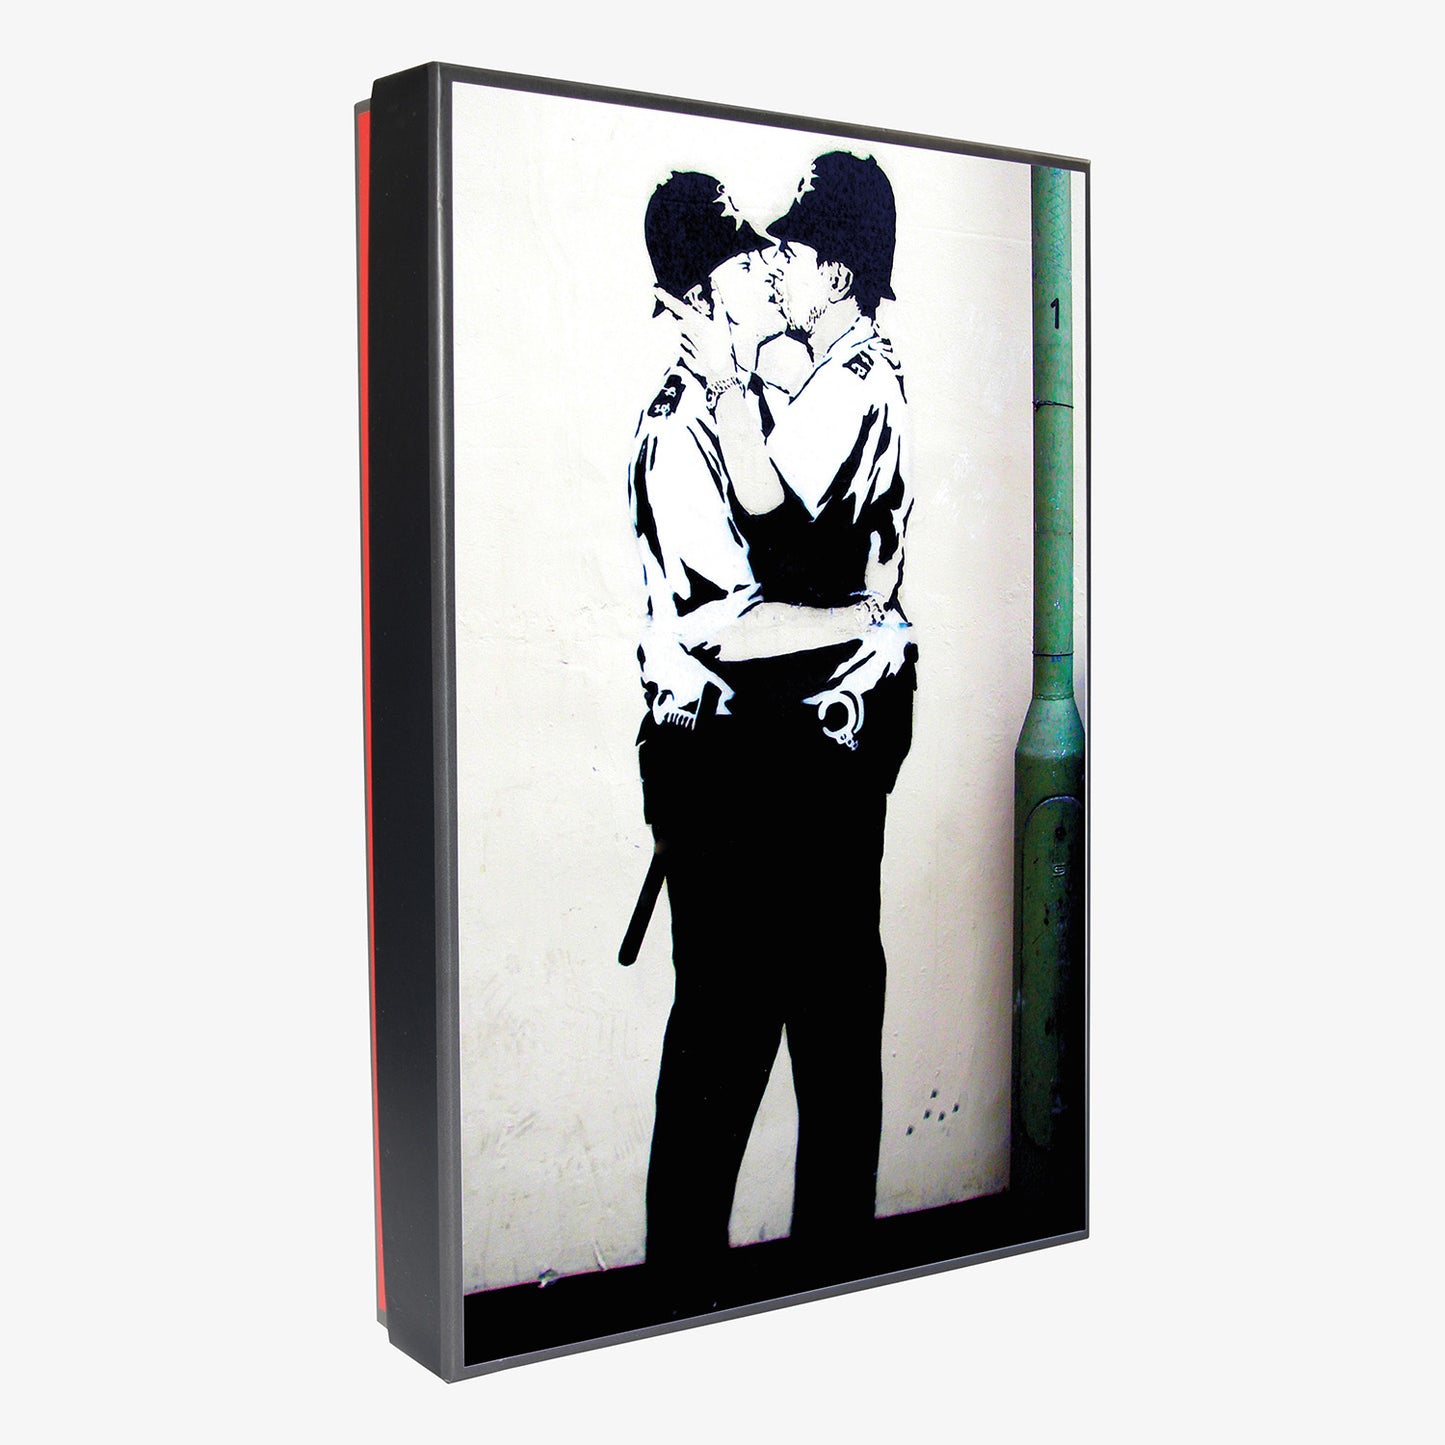 The world's most famous Graffiti - Kissing Coppers - gift set